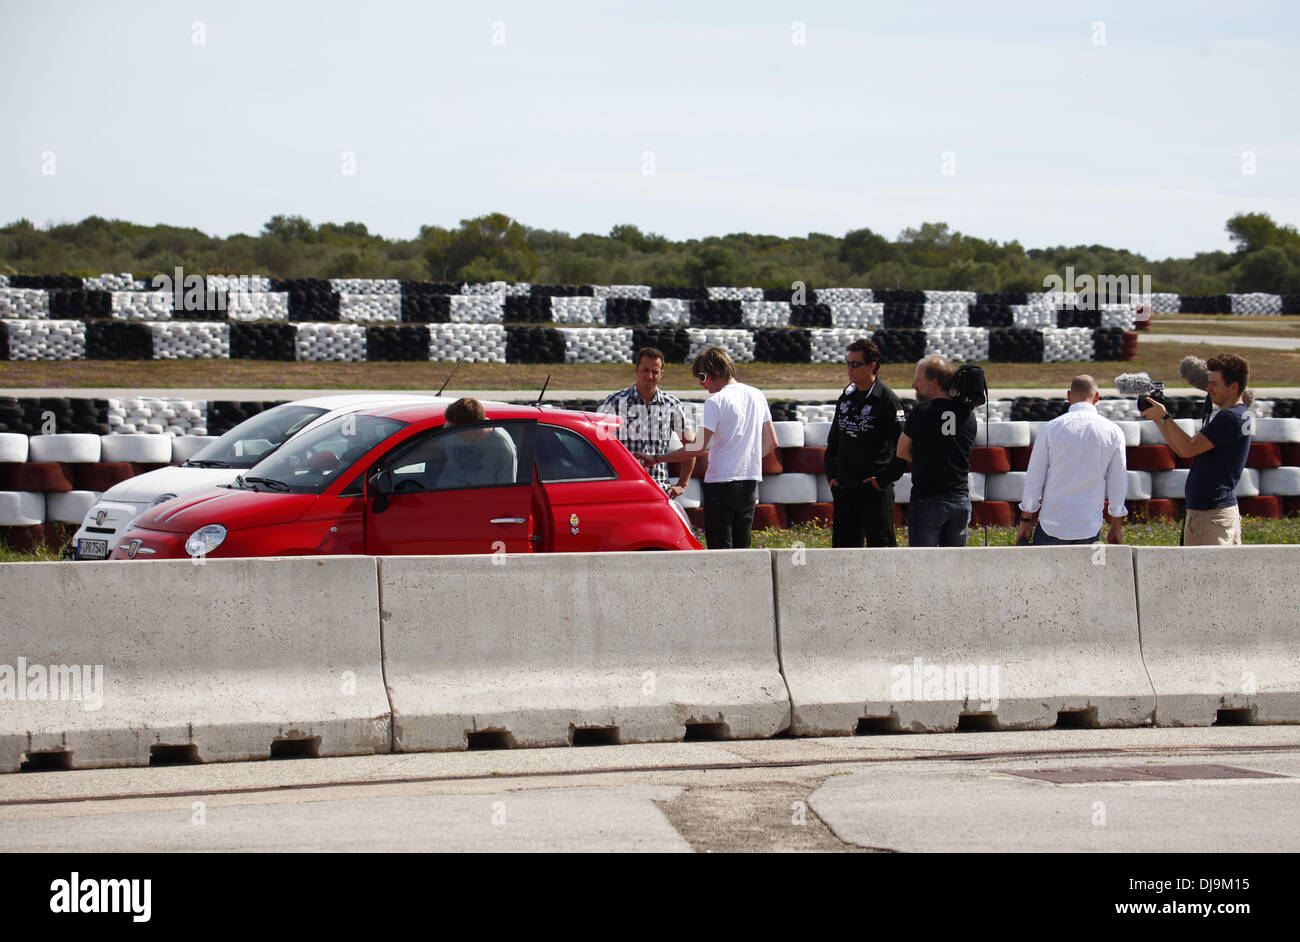 Lance David Arnold, Mickie Krause and Andy Bar filming a car race for German VOX TV show 'Promis am Limit' at Circuito Mallorca race track near El Arenal. Before the race, racing driver Lance David Arnold gives Krause and Bar an introduction into race dri Stock Photo